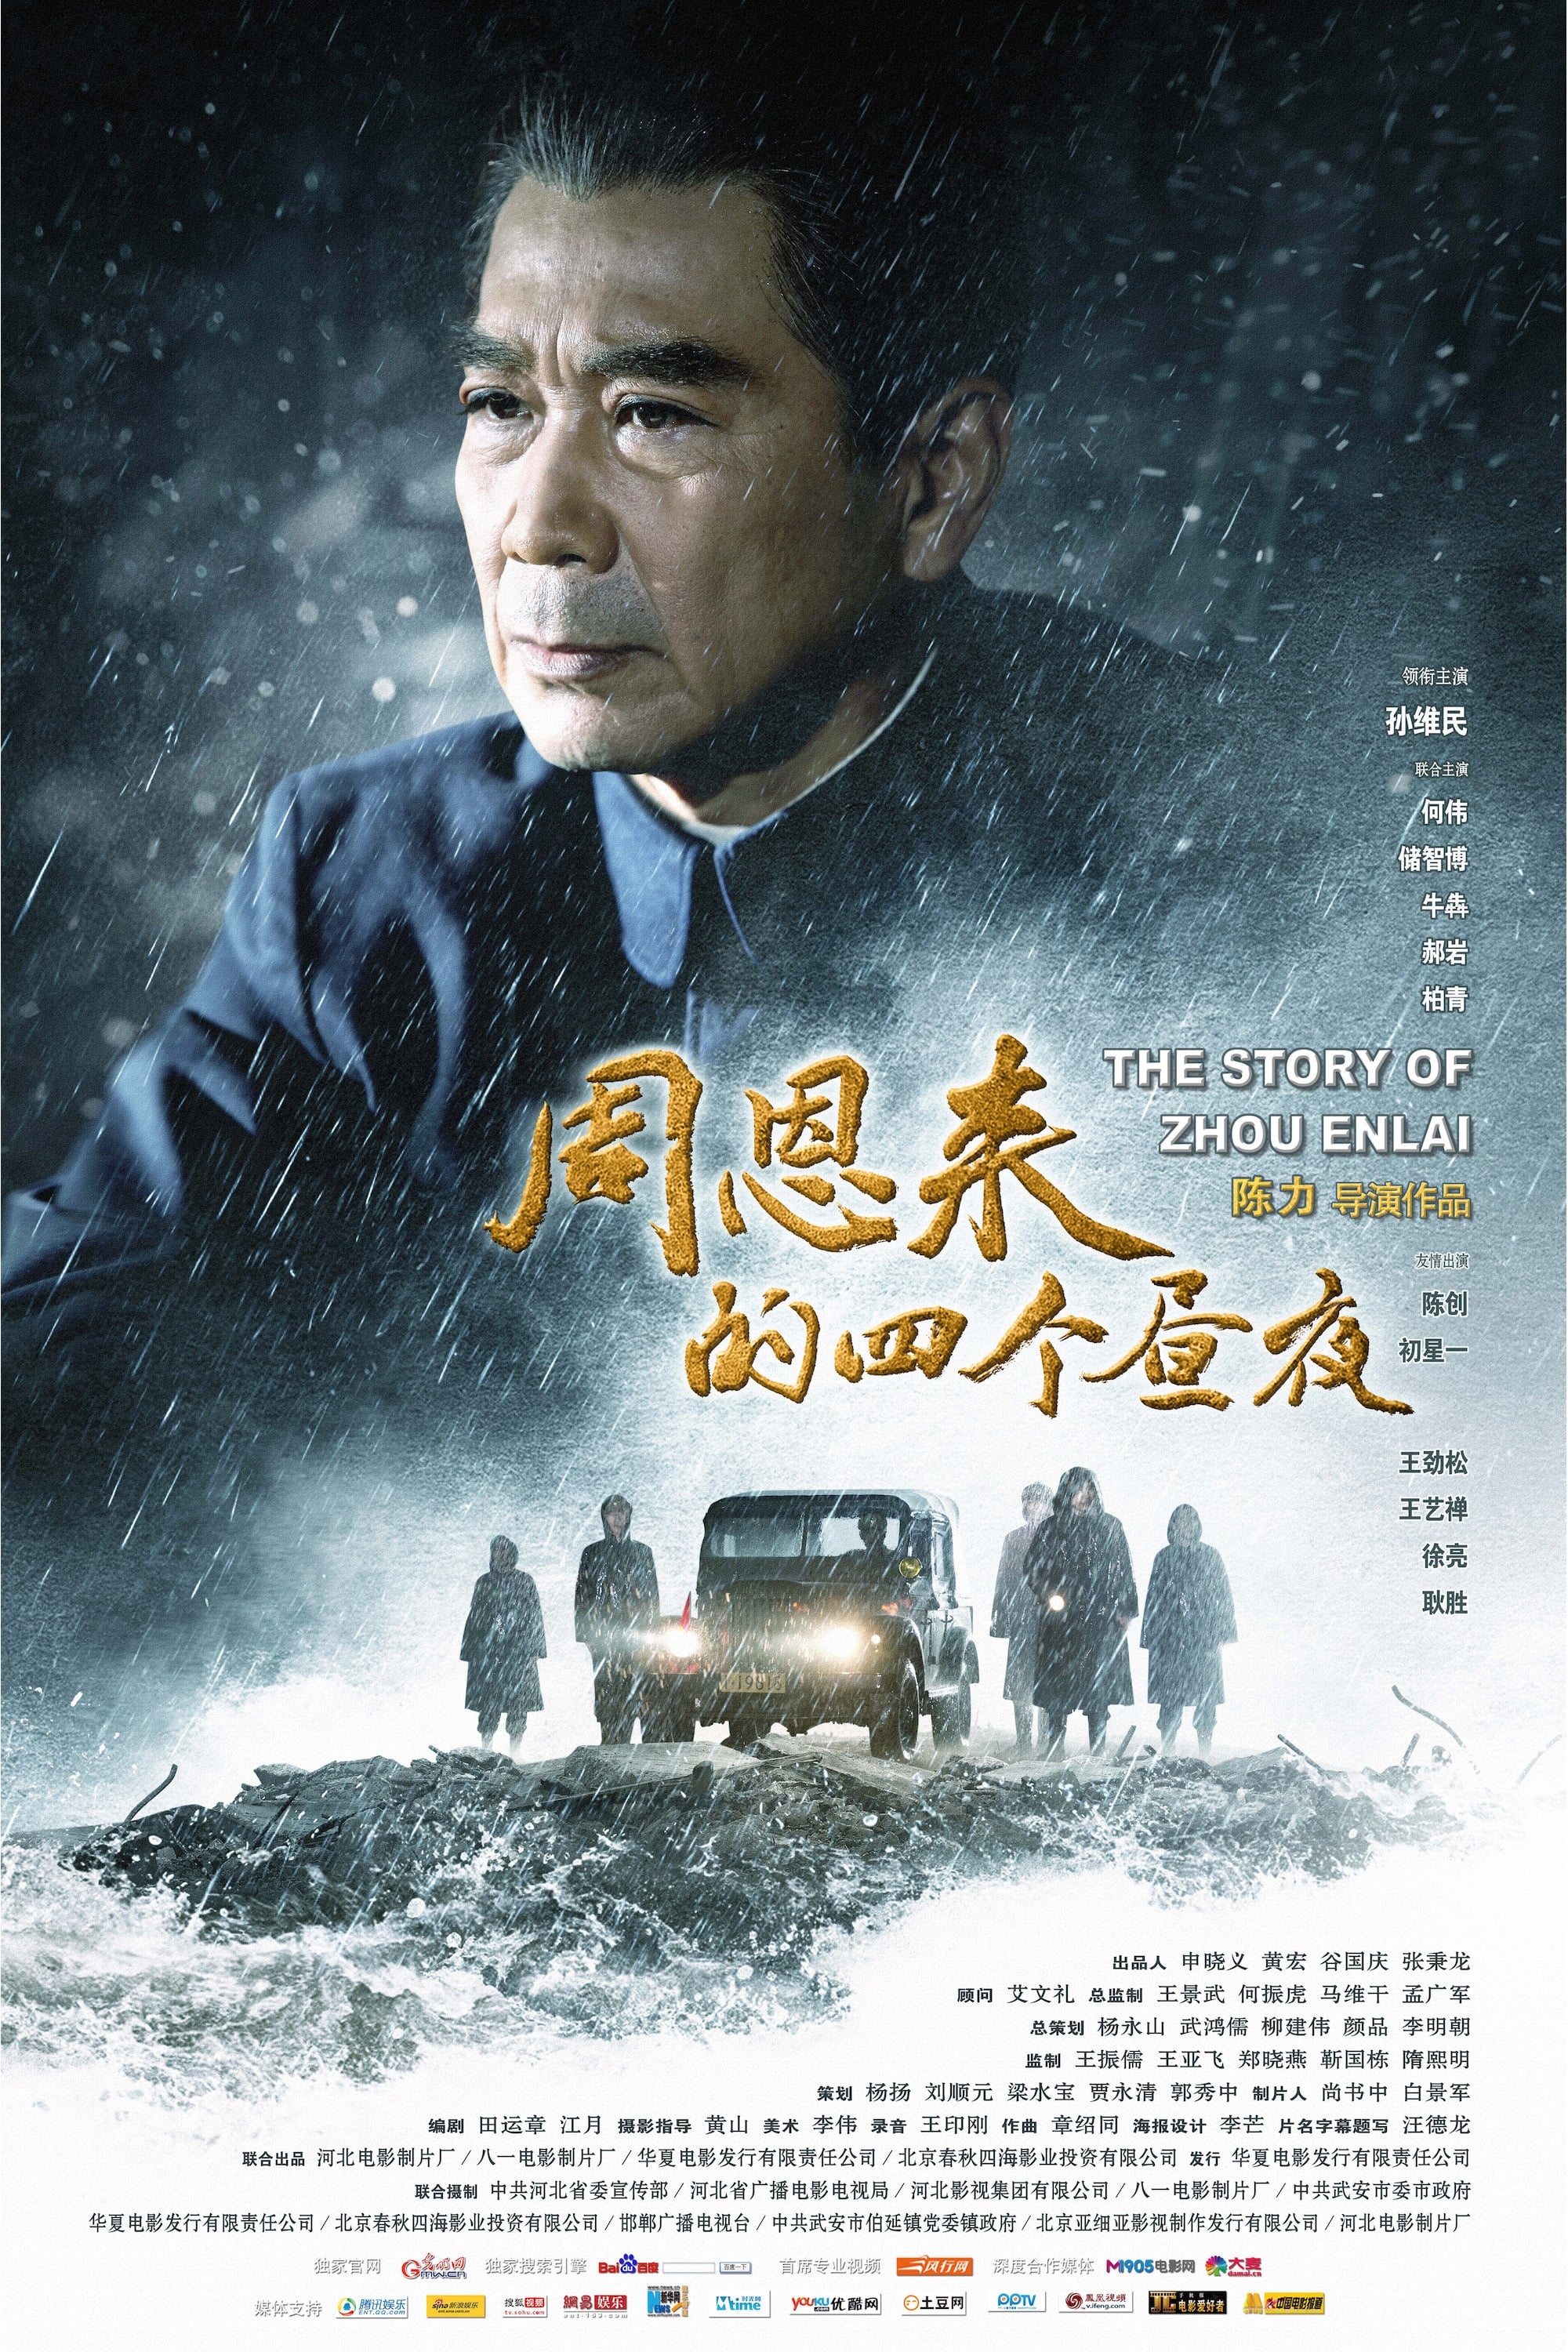 The Story of Zhou Enlai